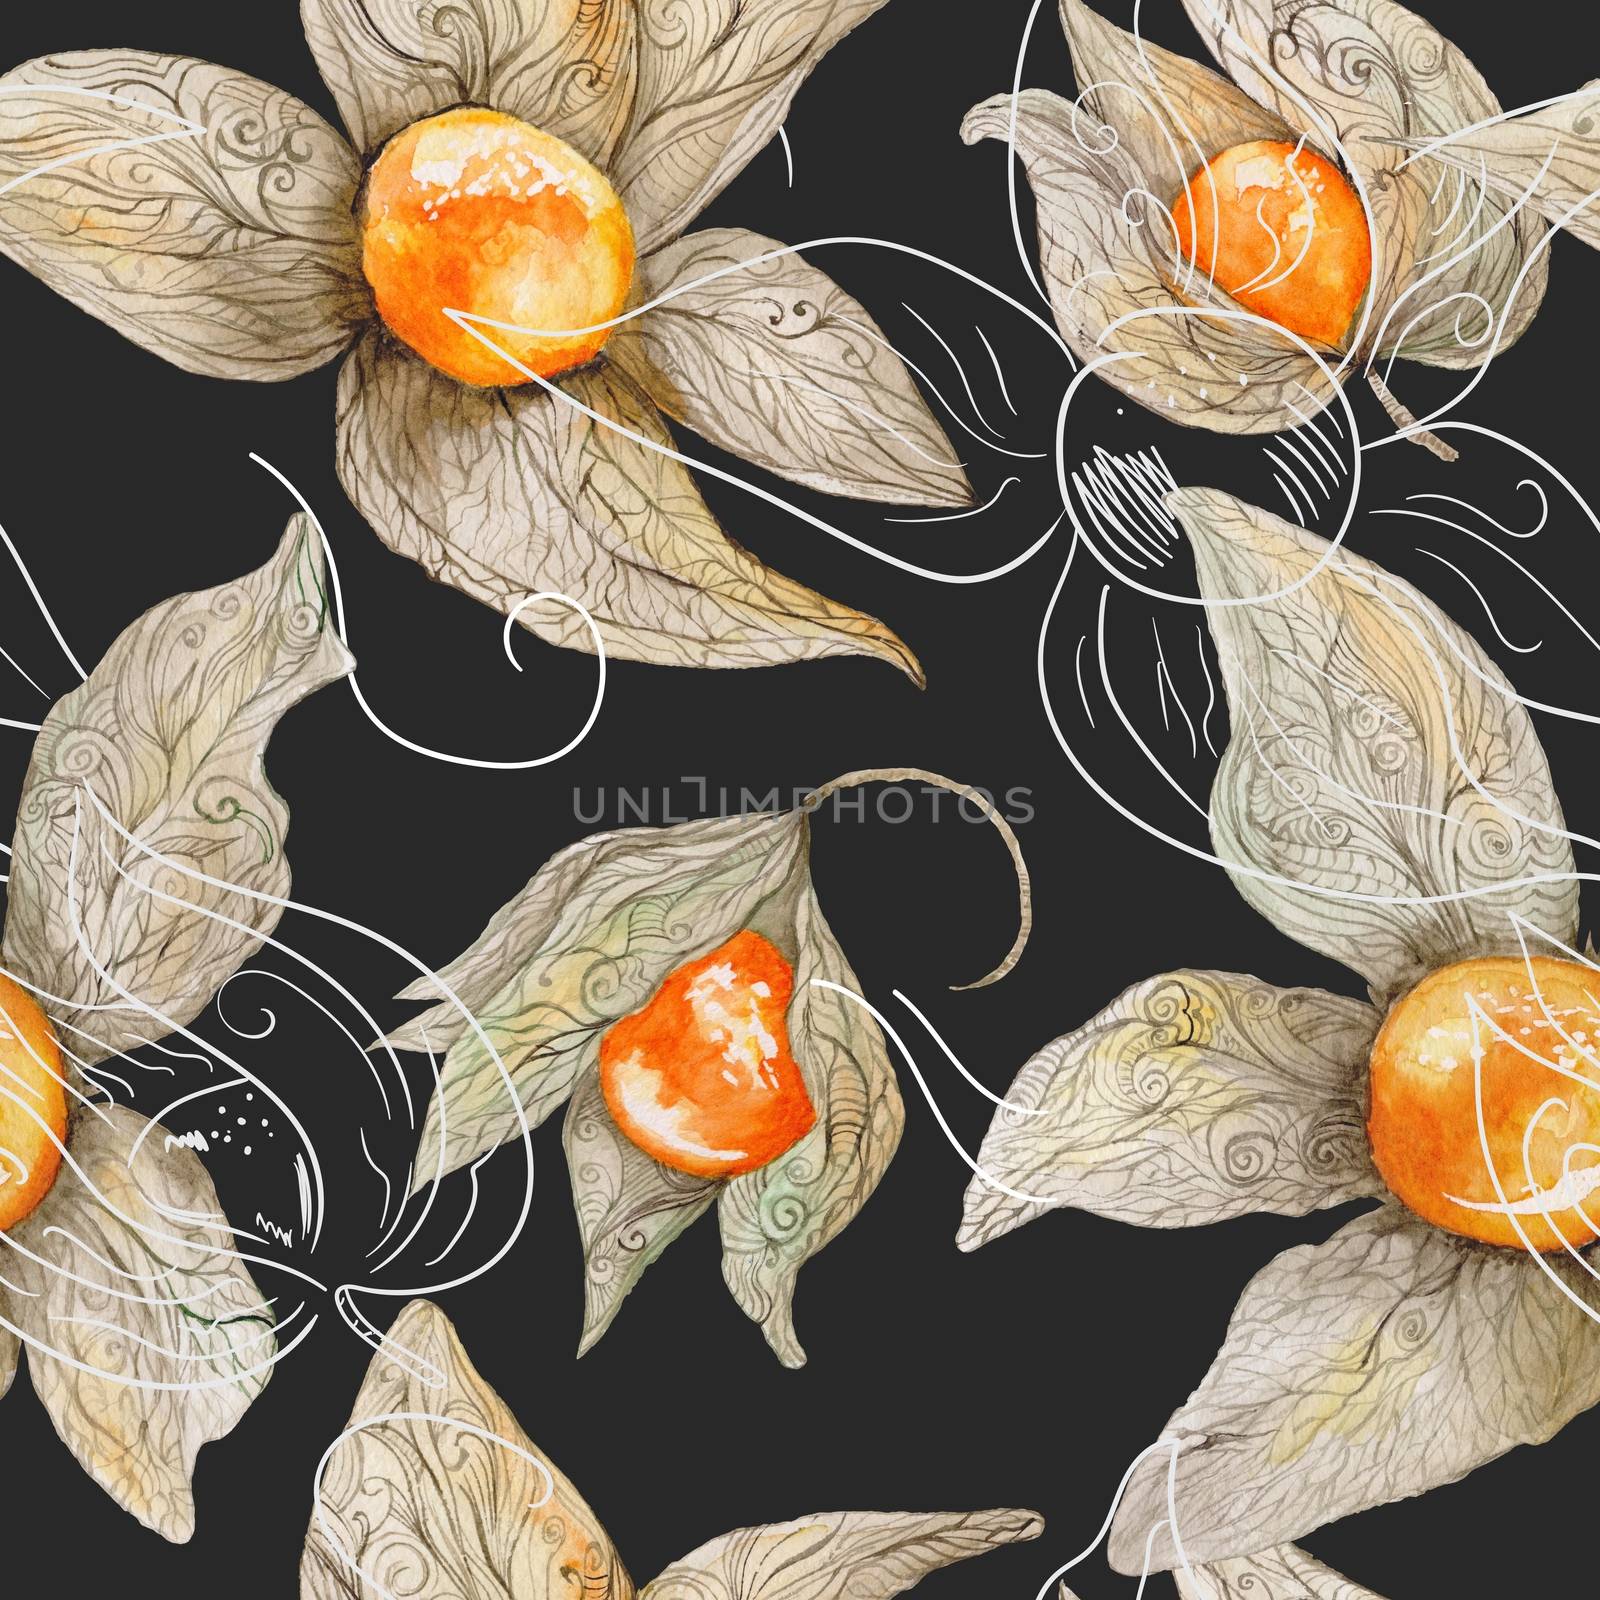 Colored aquarelle seamless texture with bright orange berries and pastel ornamental leafs on black background for menu, kitchen, cafe design